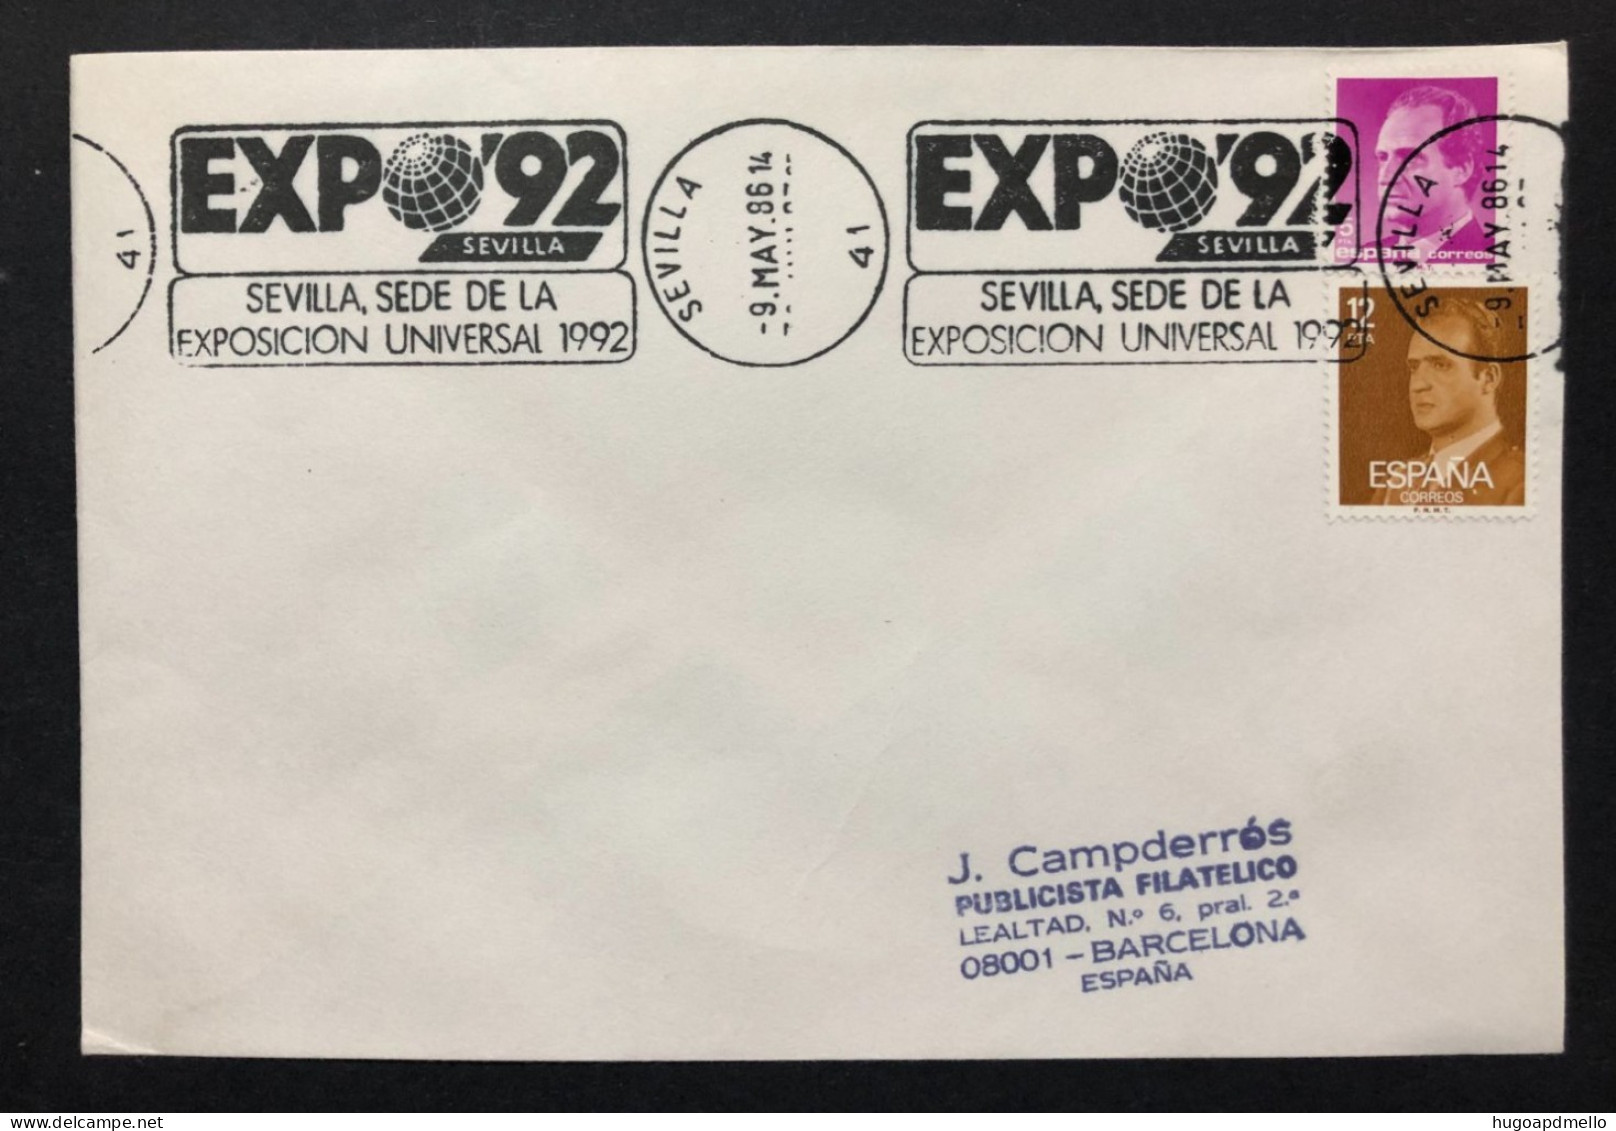 SPAIN, Cover With Special Cancellation « EXPO '92 », « SEVILLA Postmark », 1986 - 1992 – Séville (Espagne)